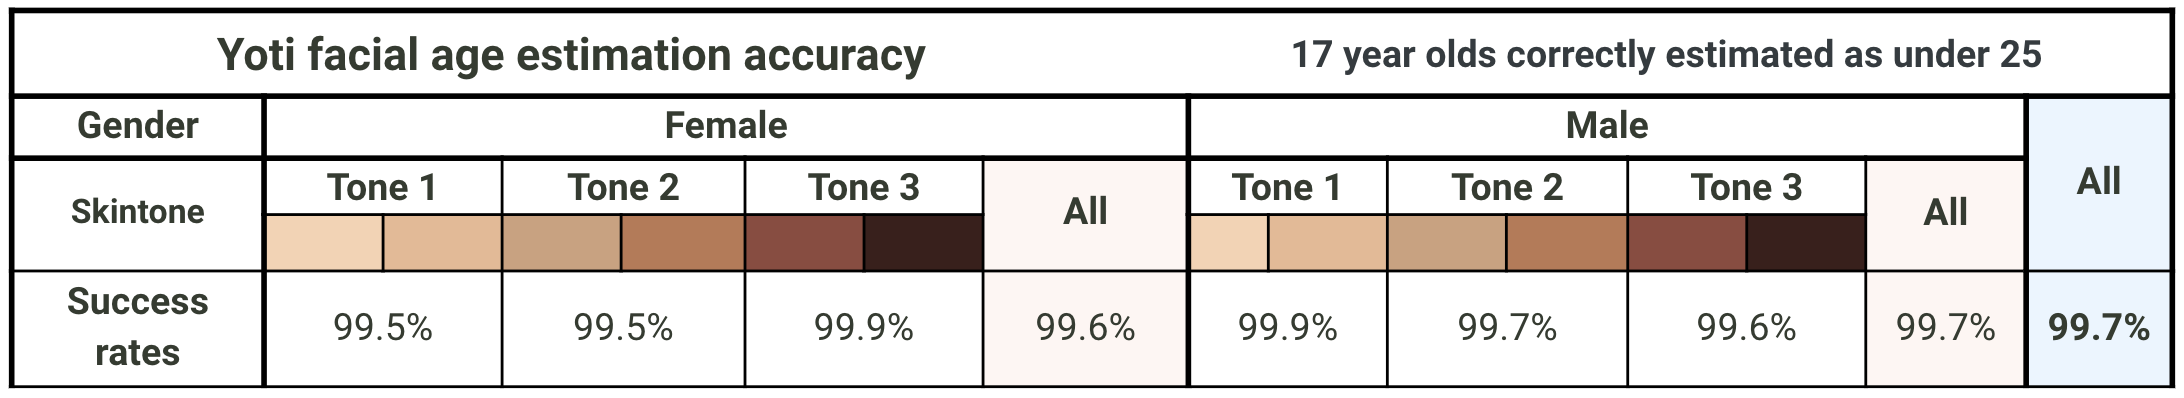 A table detailing the success rate of Yoti's facial age estimation results across skin tones. This table shows the percentage of 17-year-olds correctly estimated as under 25